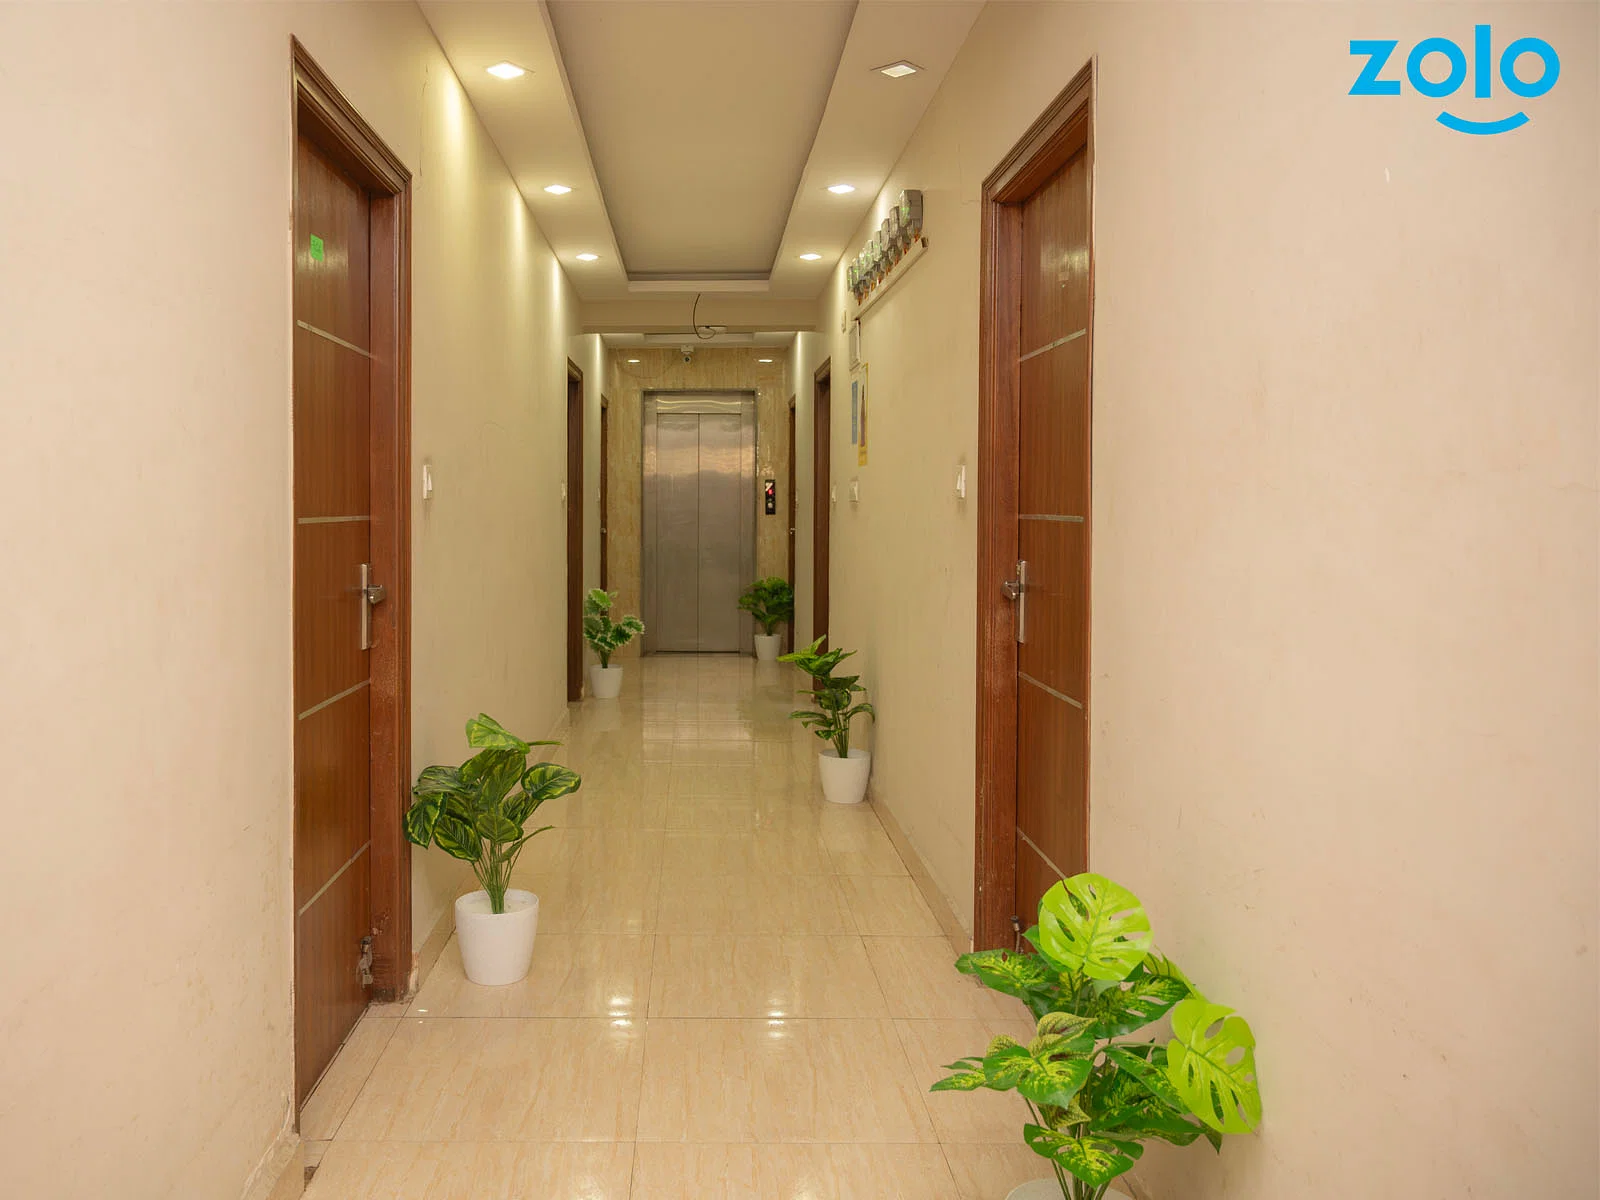 fully furnished Zolo single rooms for rent near me-check out now-Zolo Maple